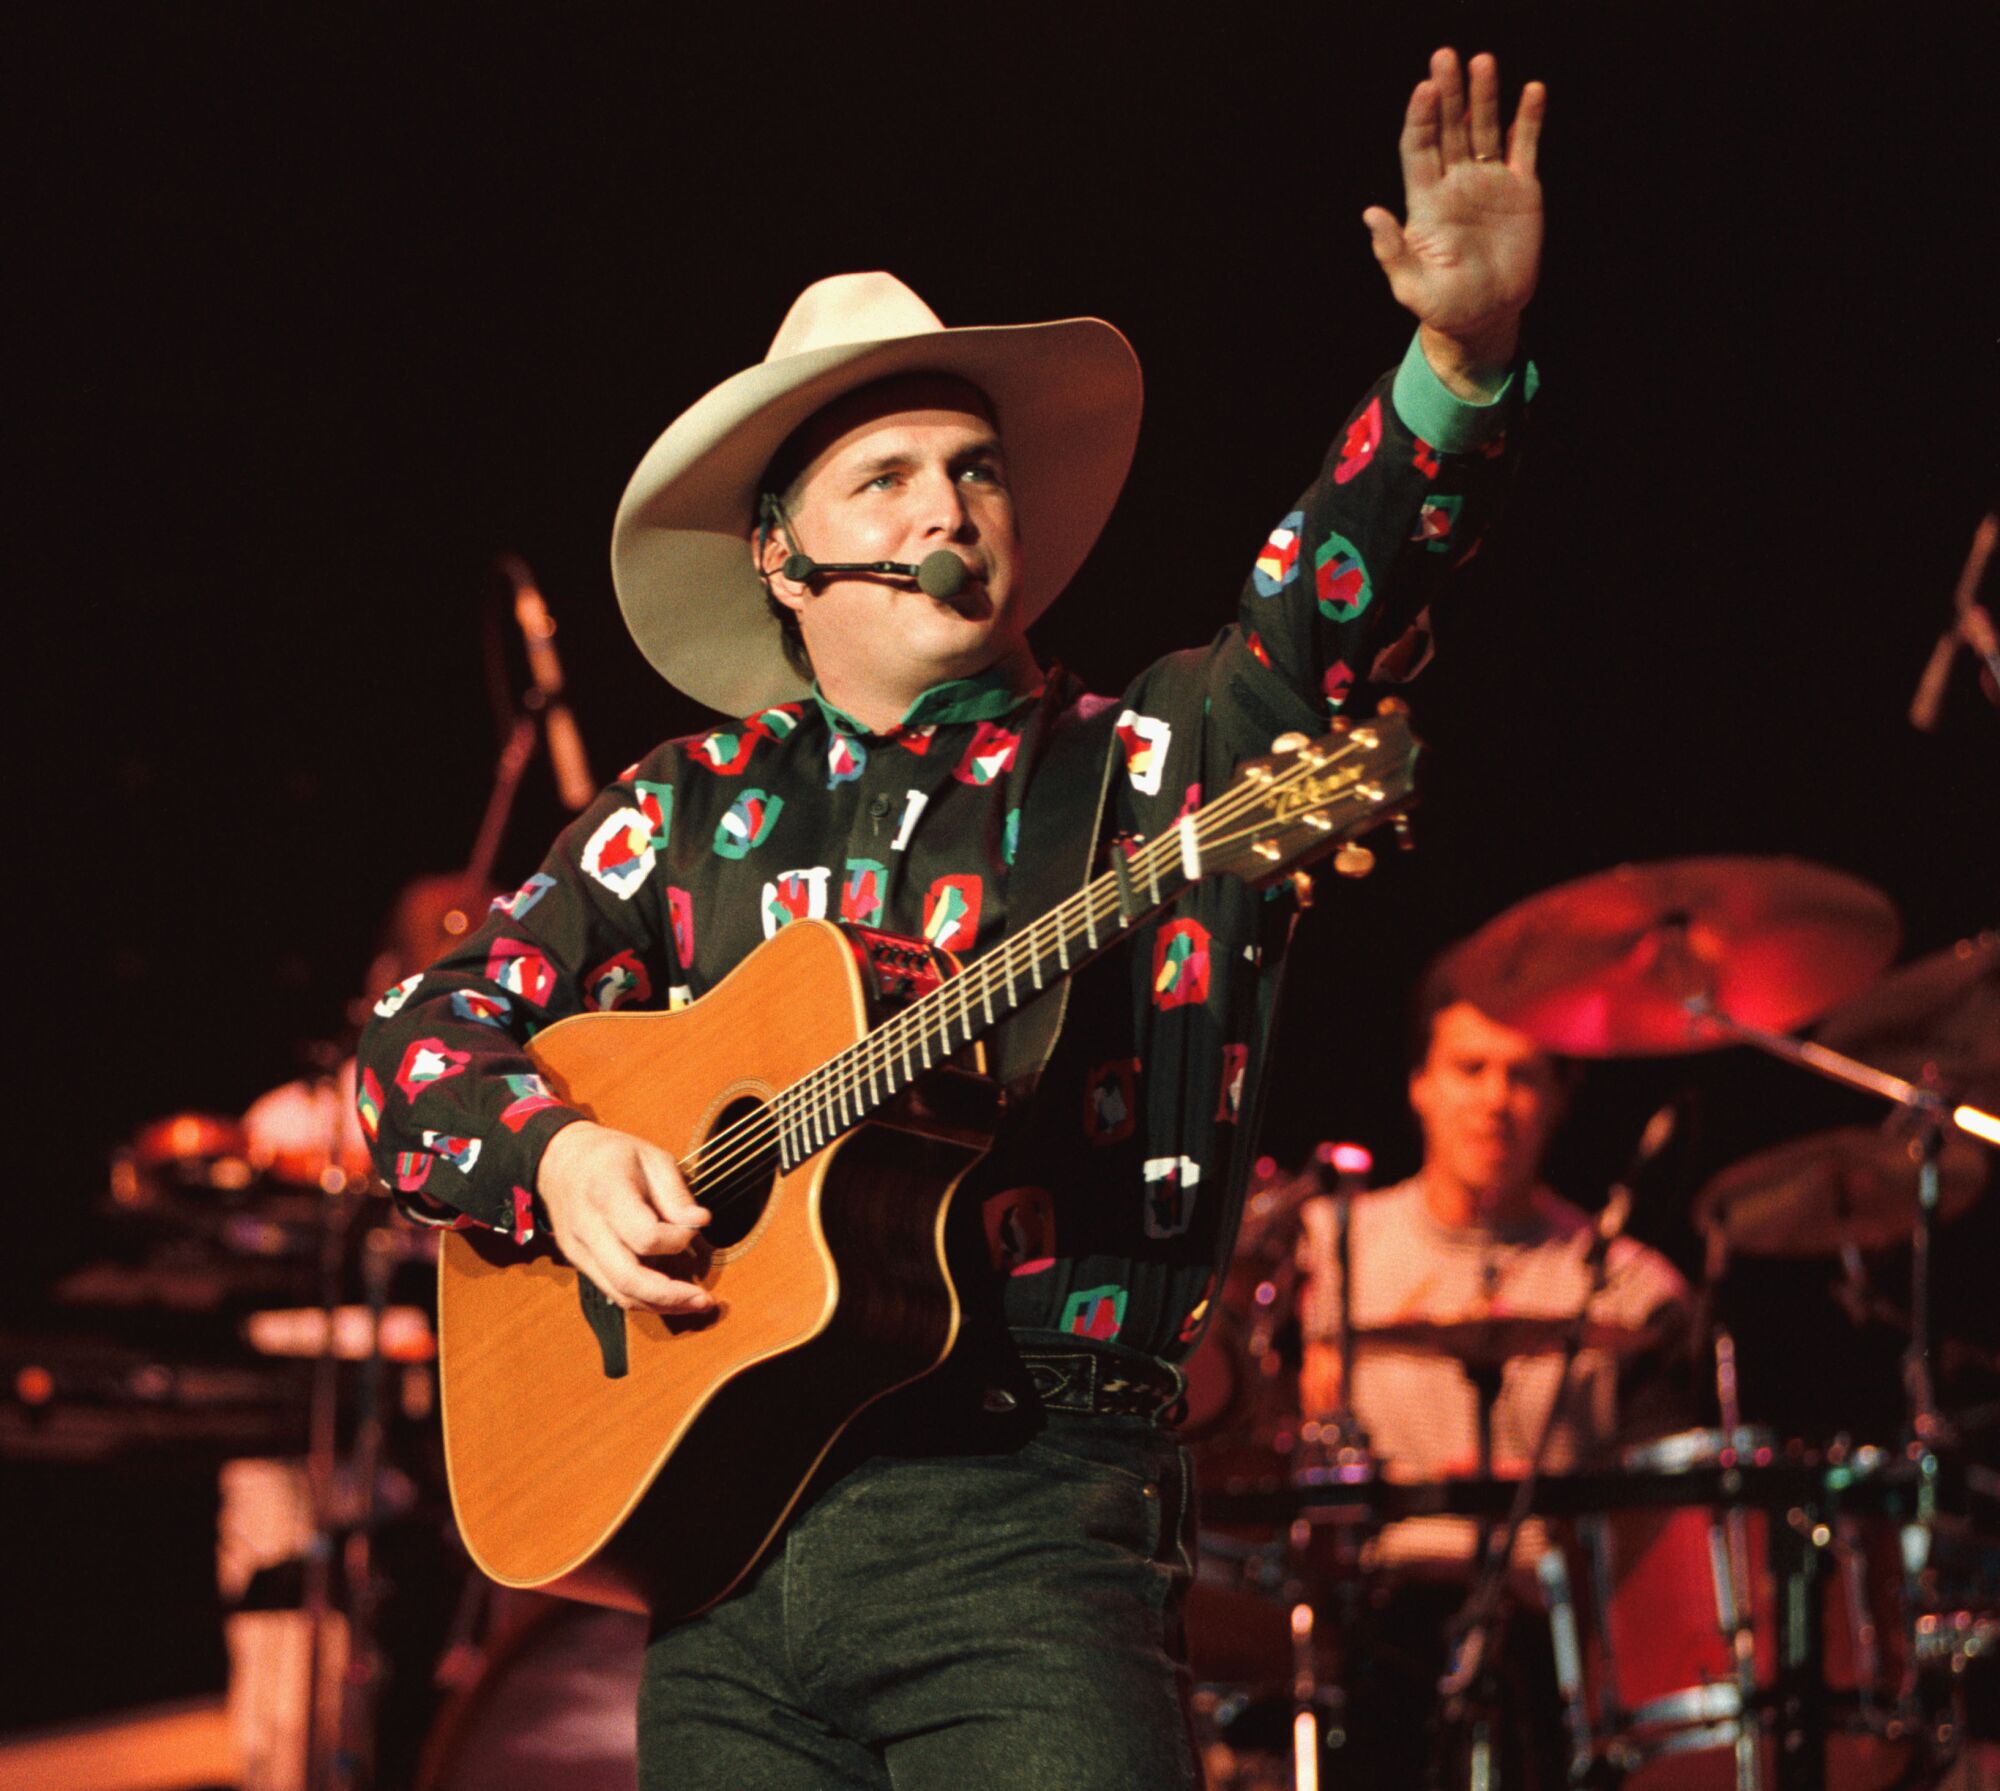 A man in a cowboy hat and holding a guitar waves from the stage